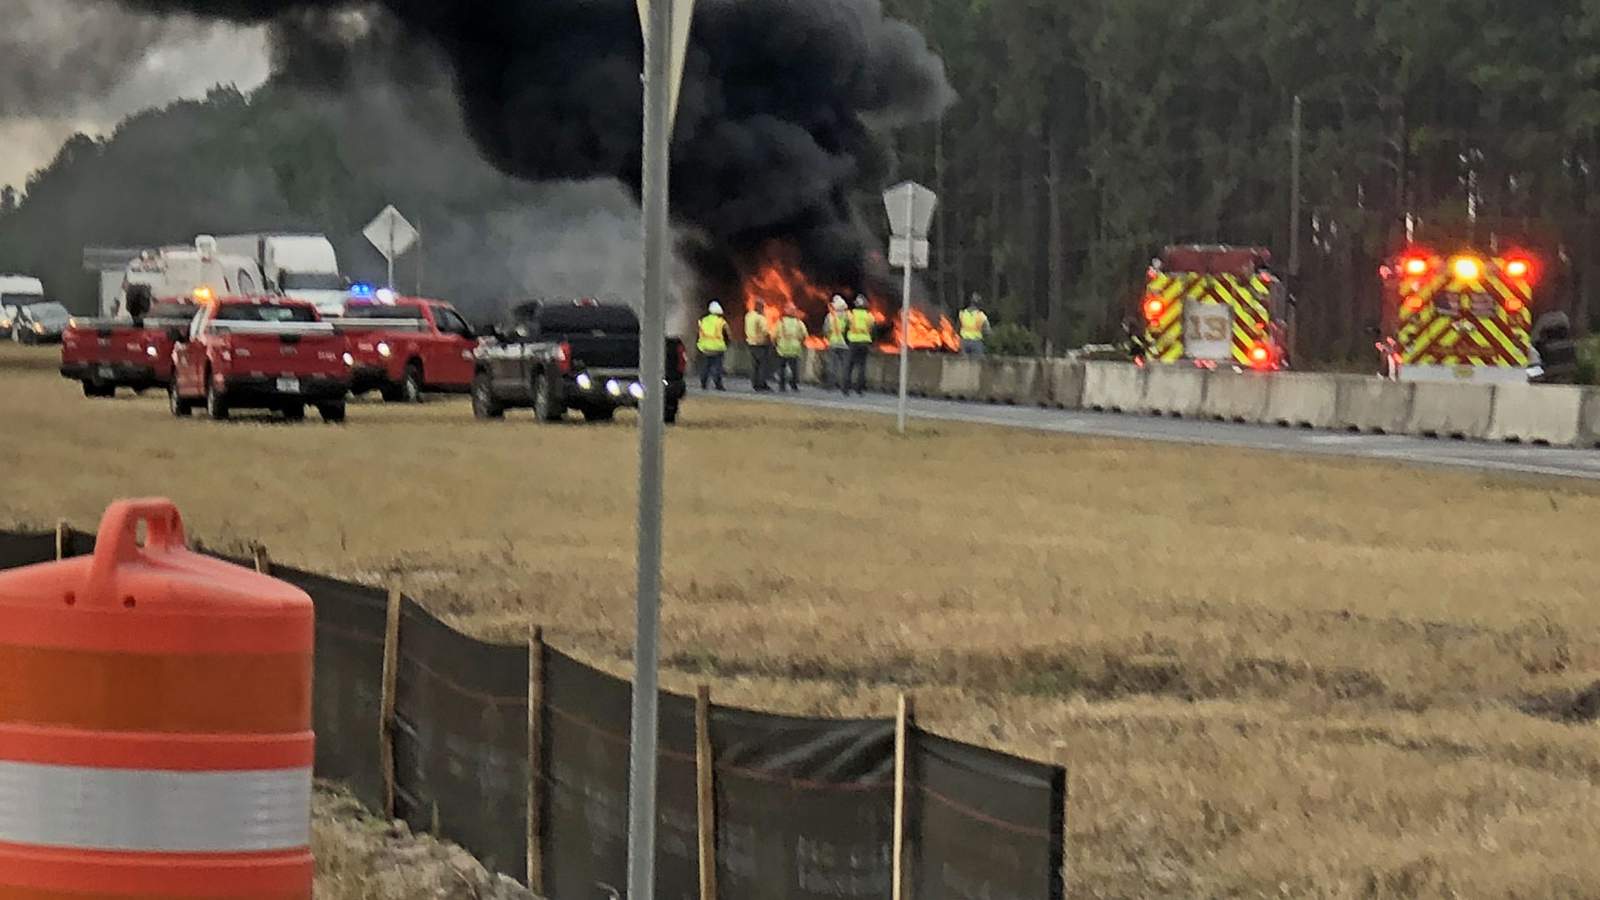 1 killed in fiery 4-vehicle crash on US 301 in Maxville